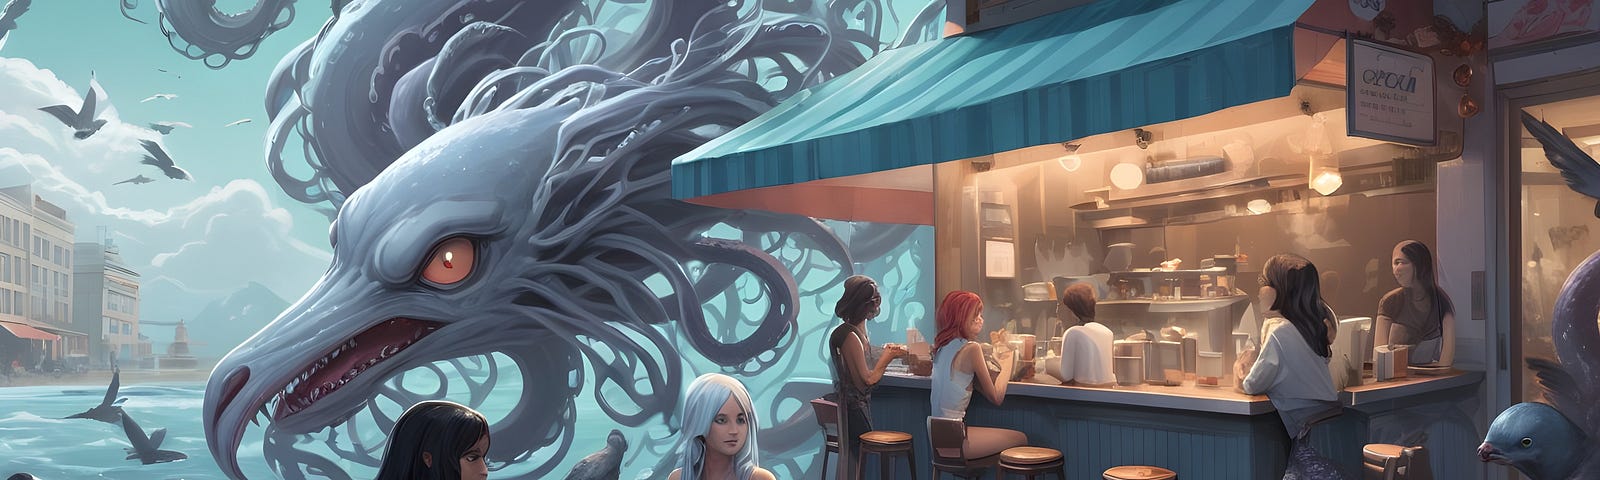 A kraken-like storm with tentacles behind a cosy cafe, pigeons around too